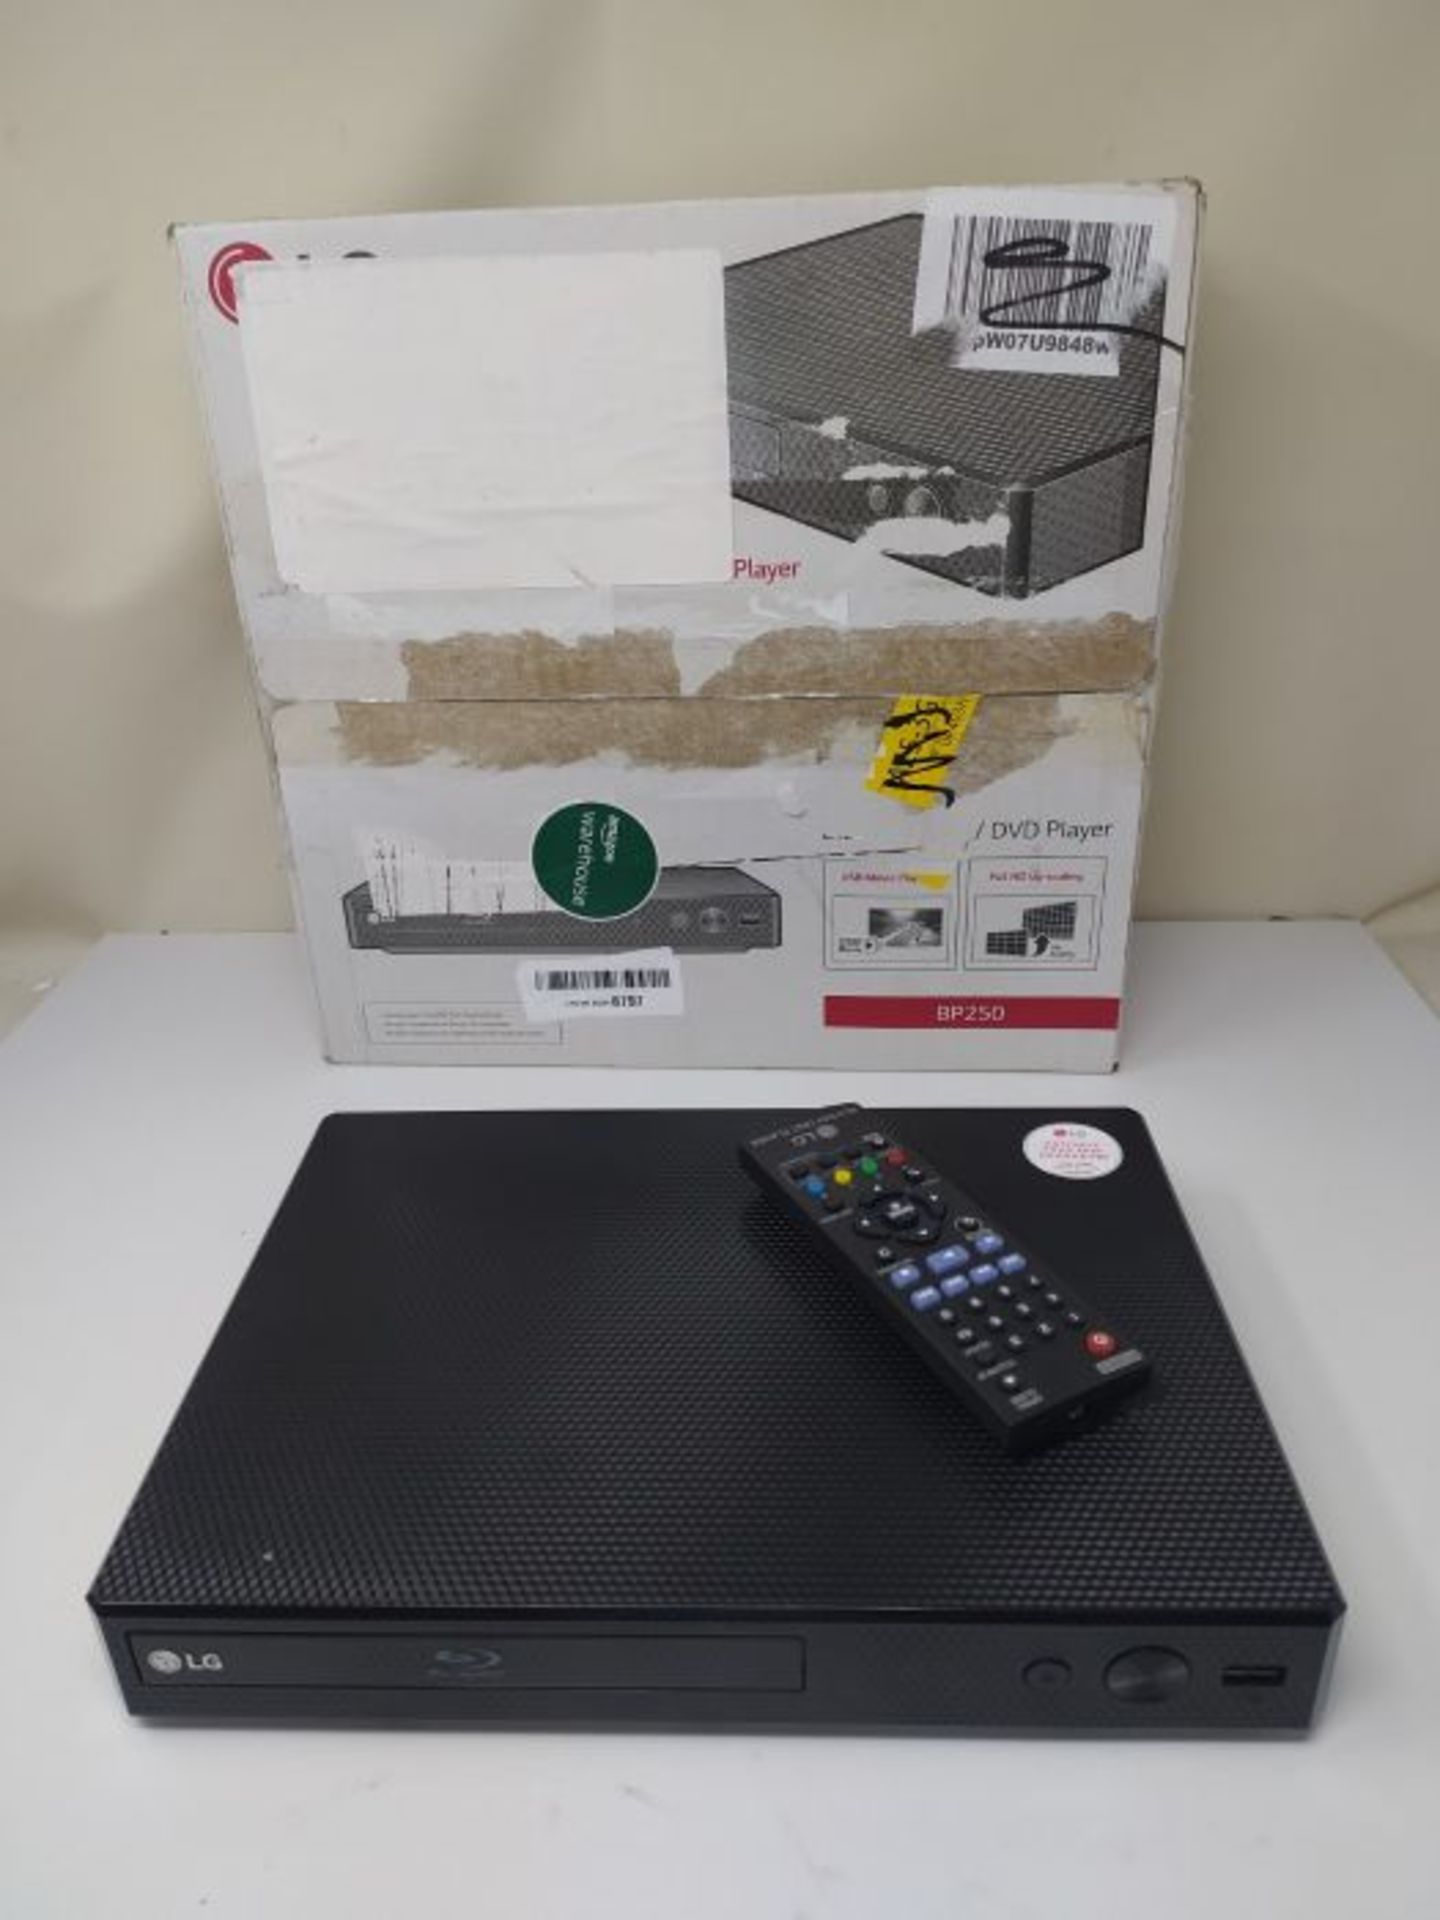 RRP £50.00 LG BP250 DGBRLLK Blu-Ray and DVD Disc Player with Full HD Up-scaling and external HDD - Image 2 of 2